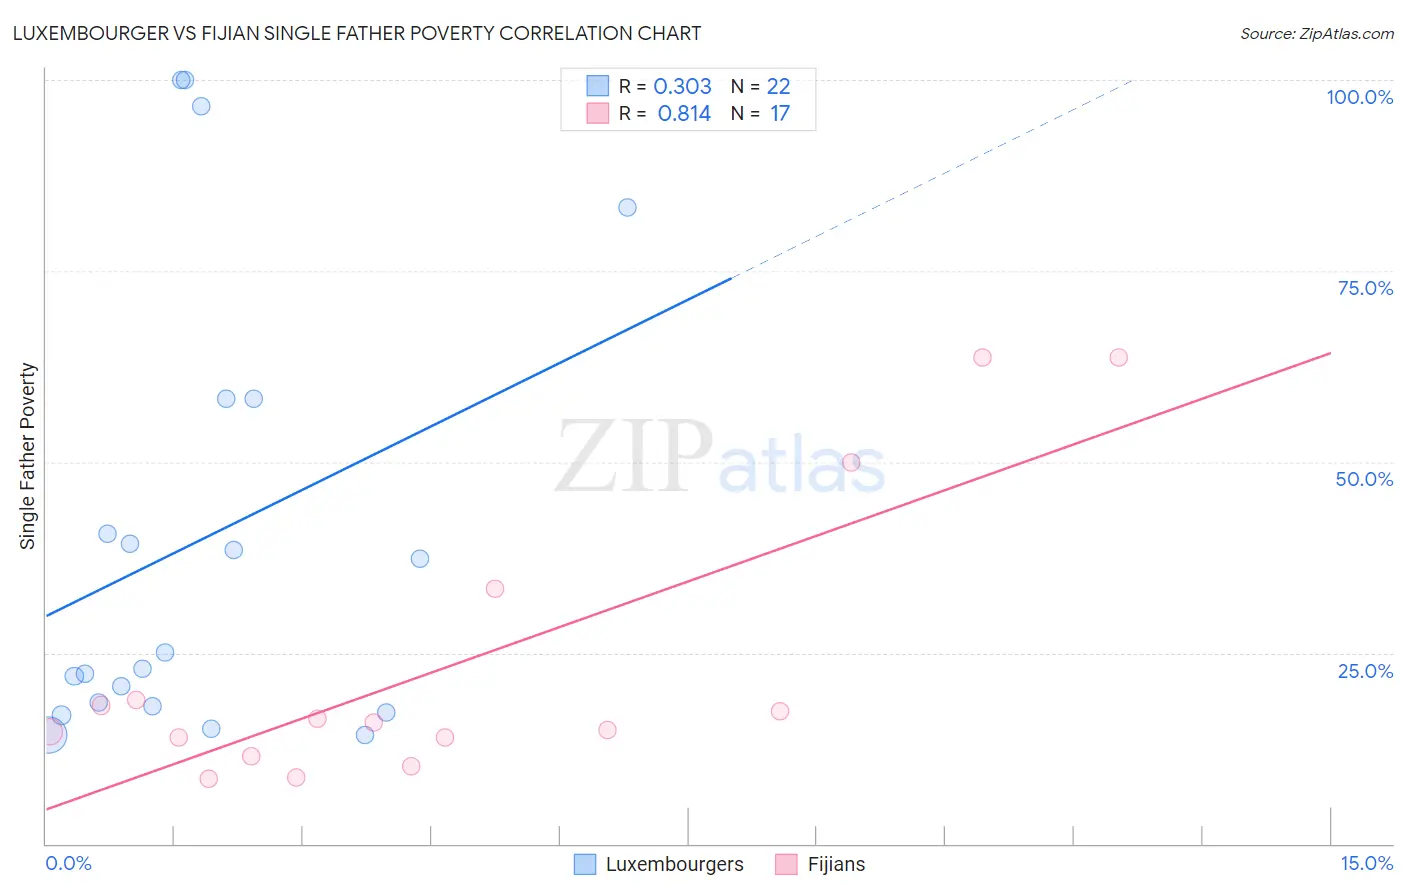 Luxembourger vs Fijian Single Father Poverty